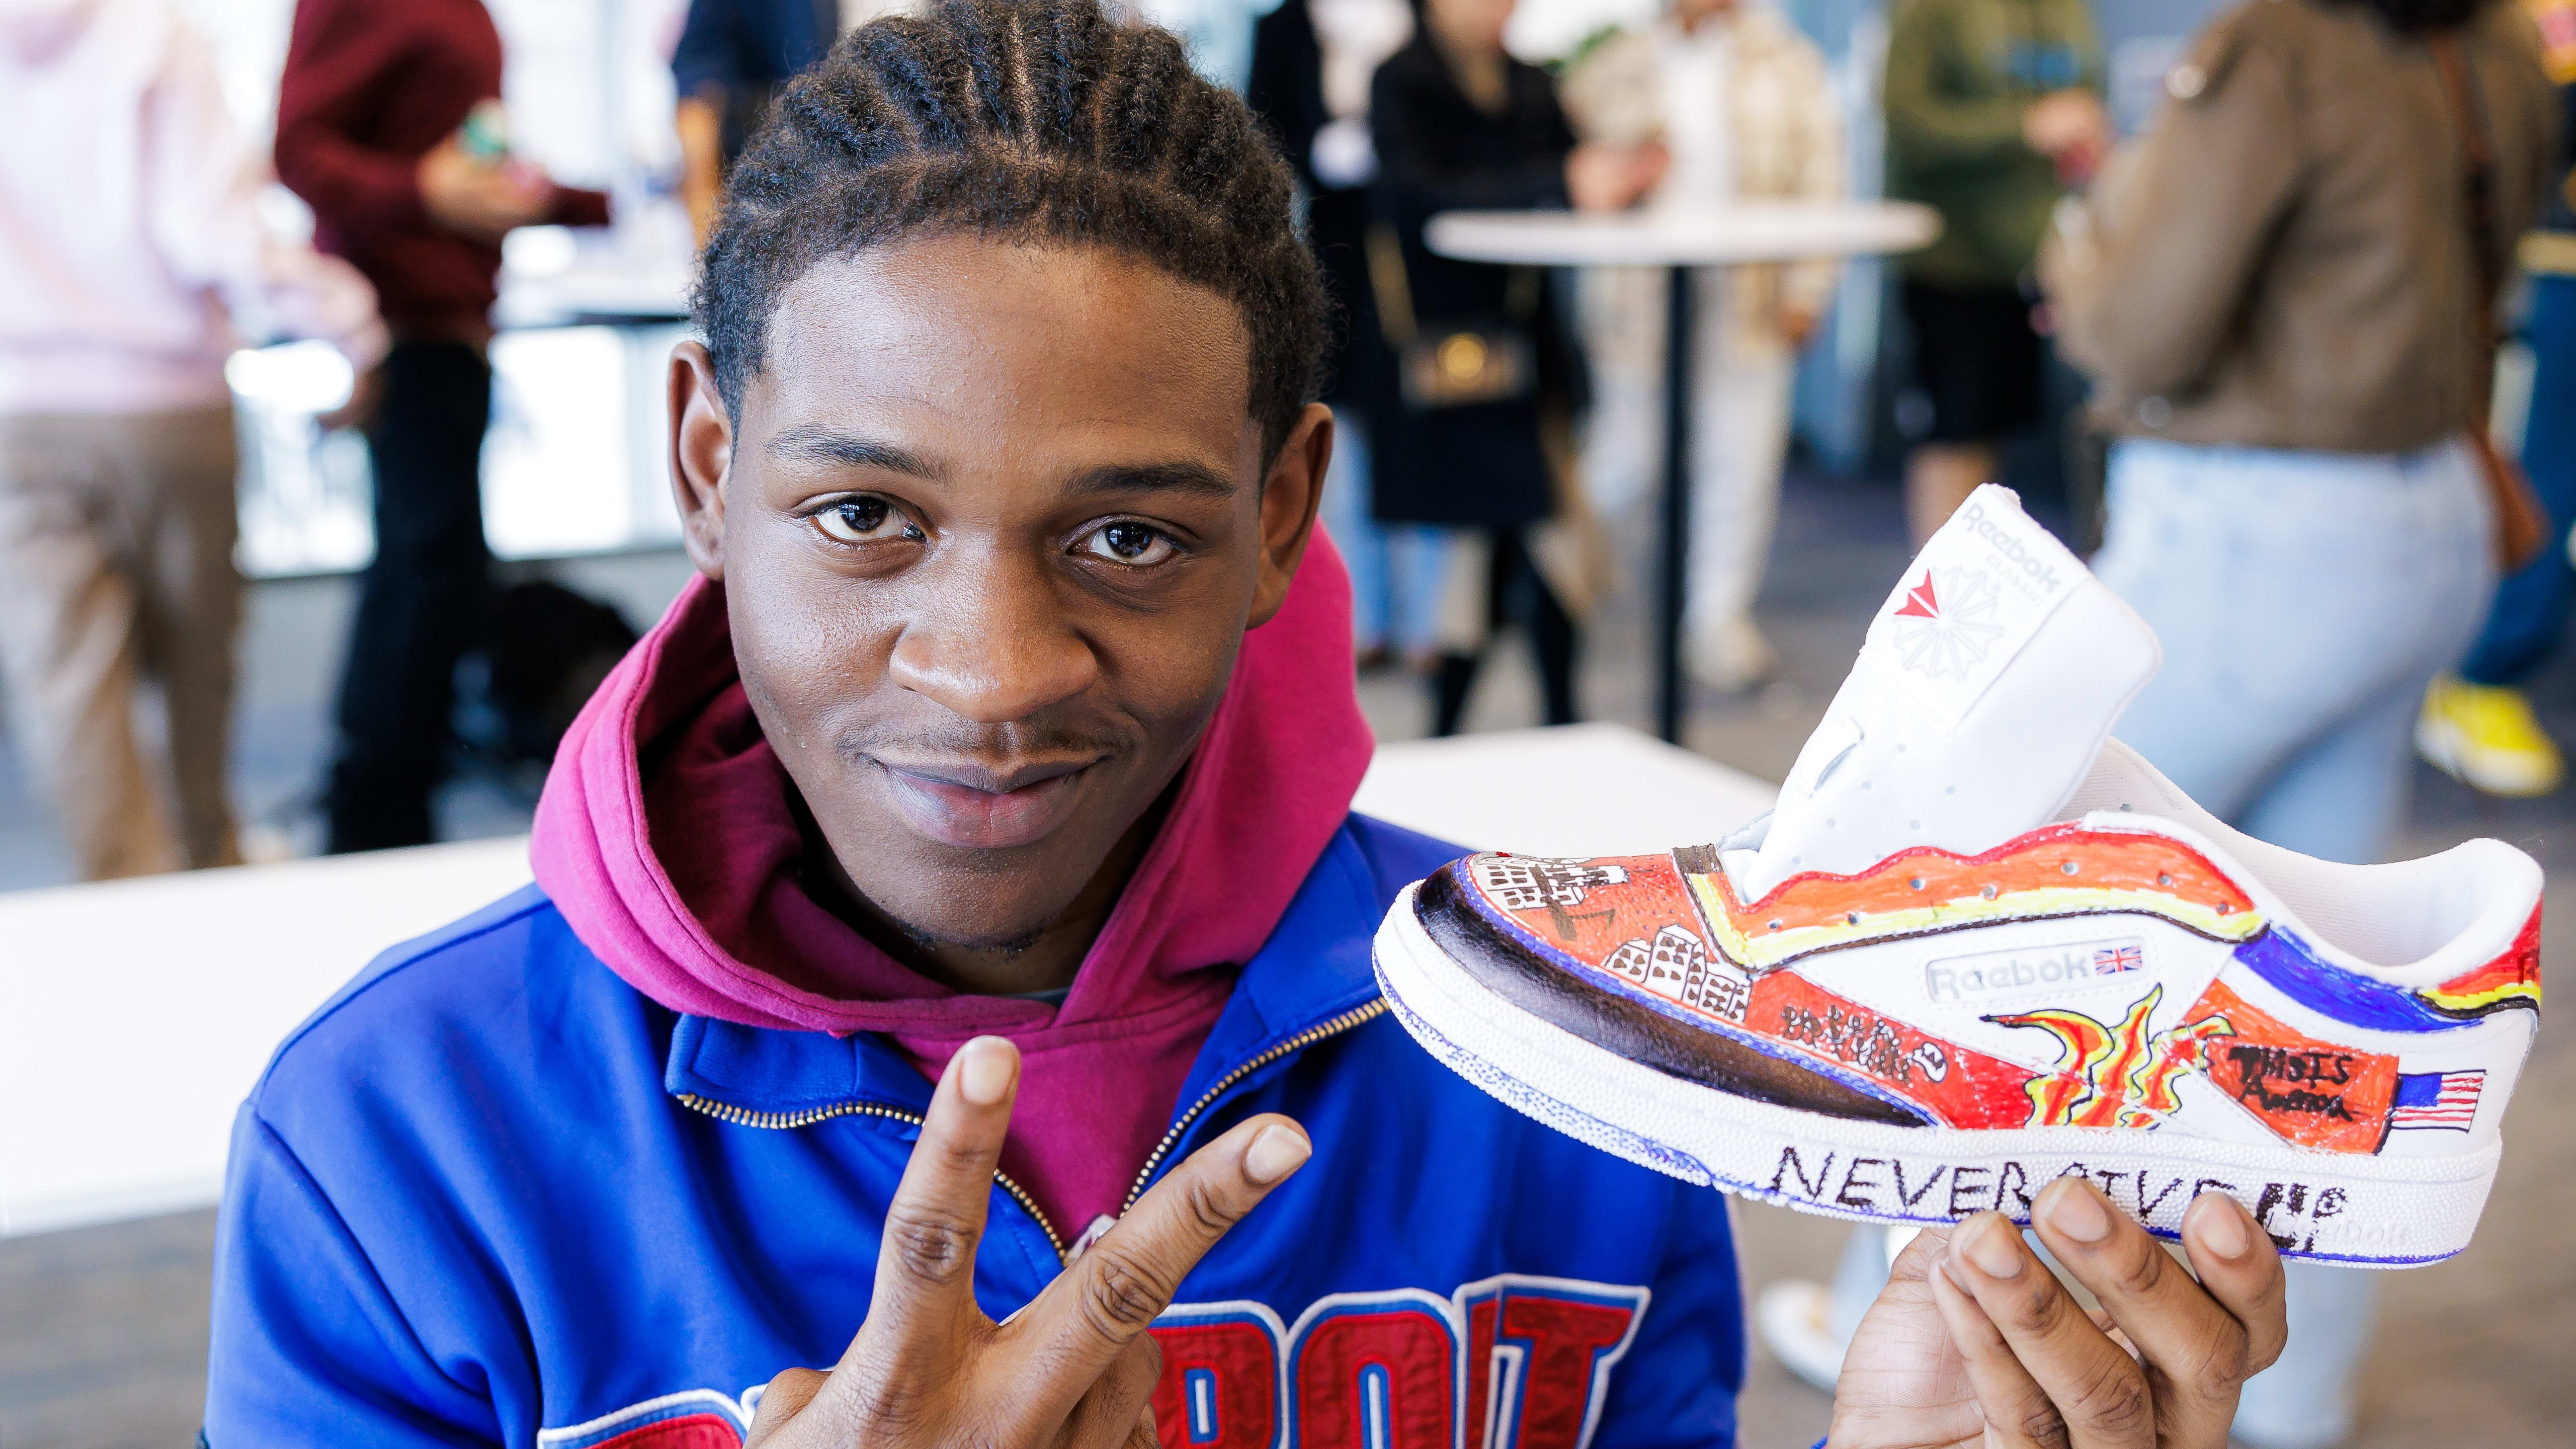 A student holds up his painted Reebok sneaker.